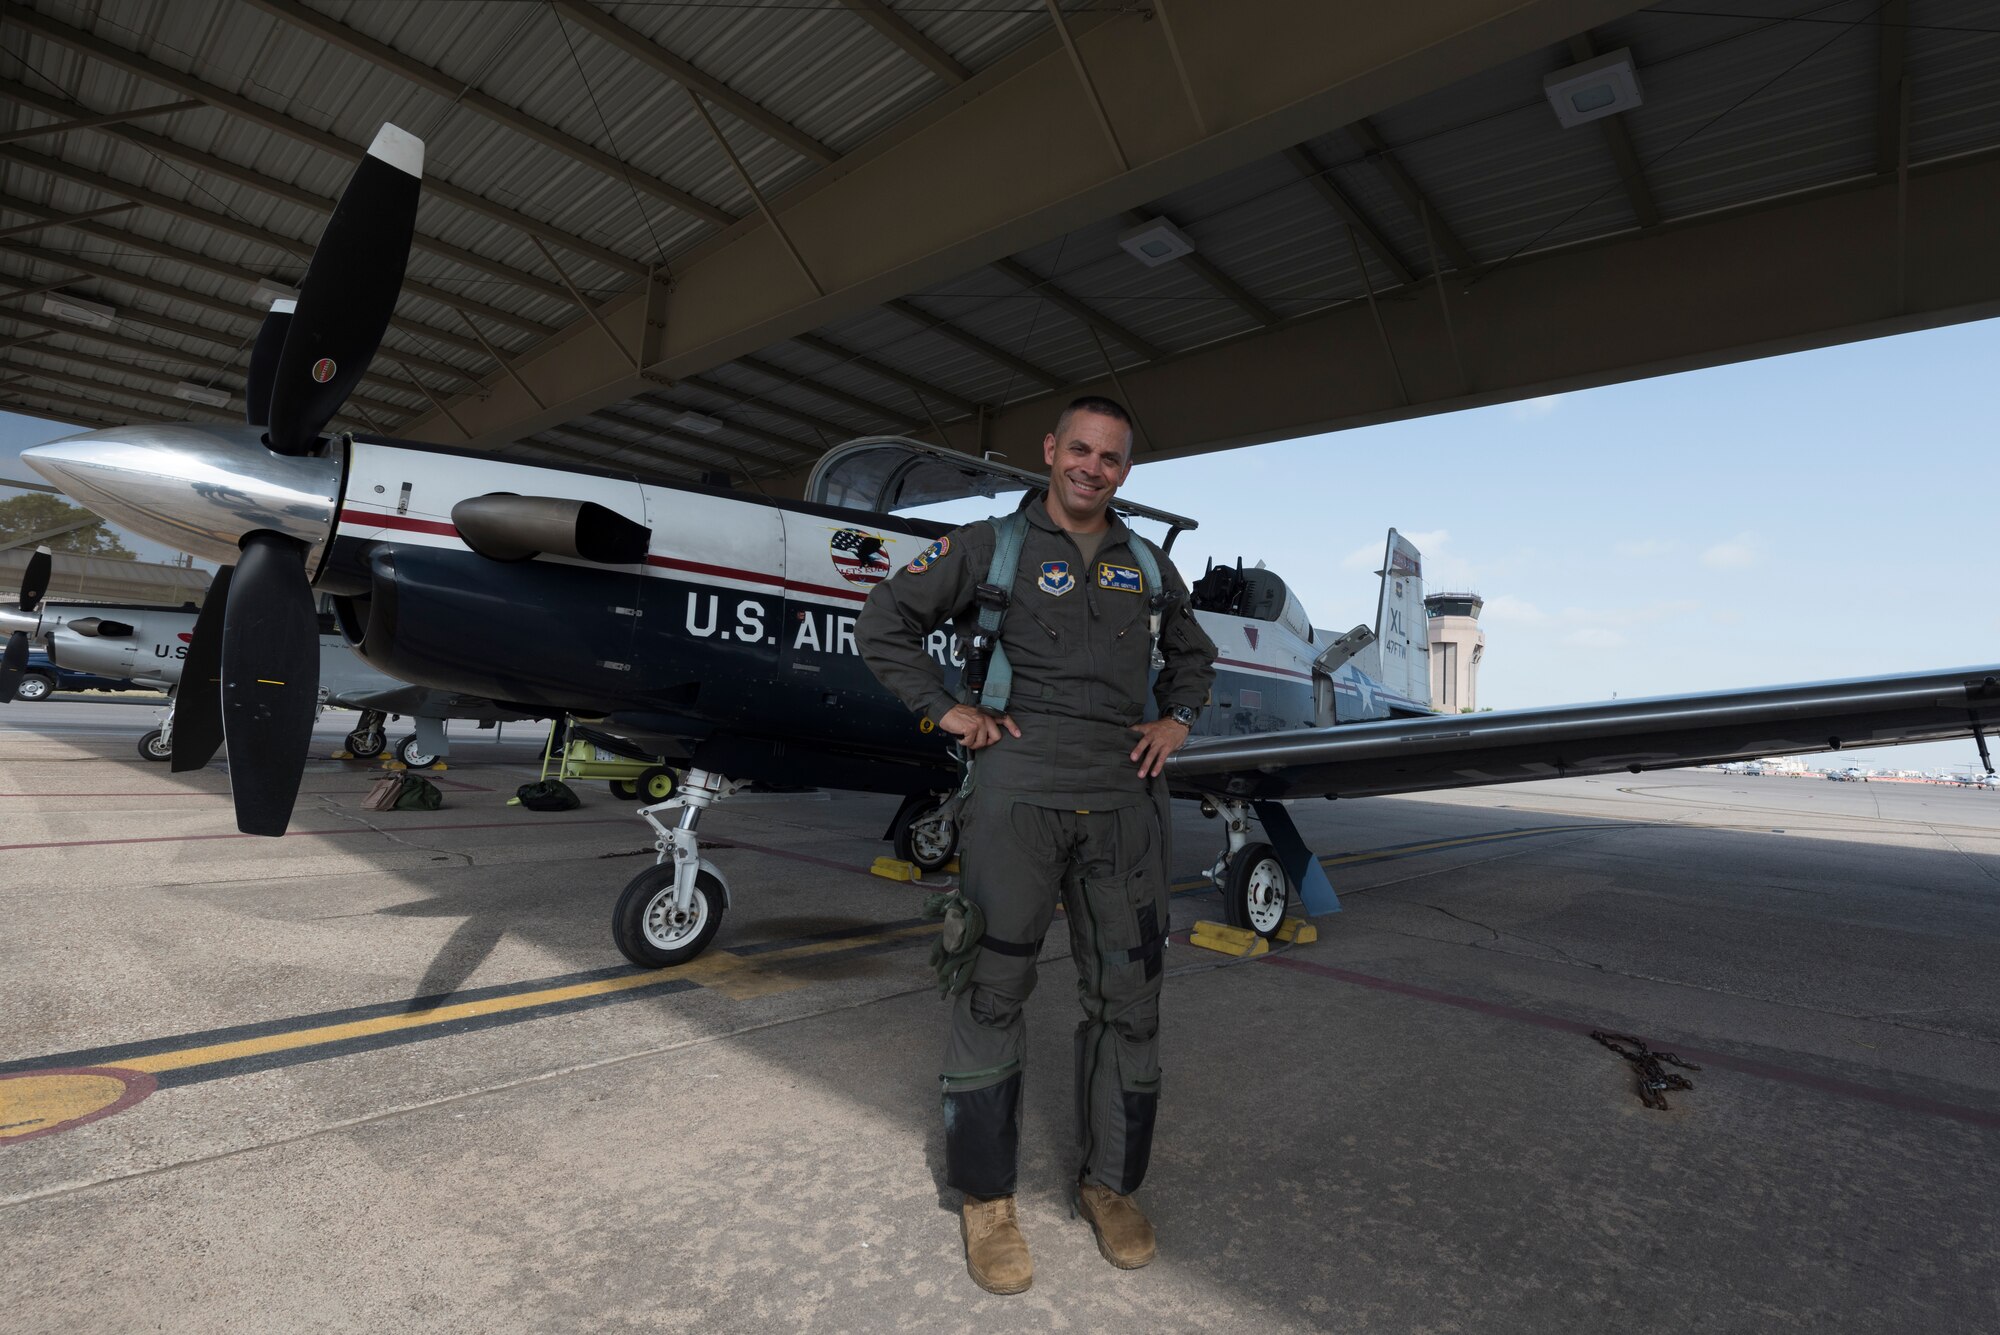 Col. Lee Gentile, 47th Flying Training Wing commander, stands in front of a T-6 Texan II, July 17, 2020 at Laughlin Air Force Base Texas. Like all other instructor pilots of Team XL, Gentile attended pilot instructor training. This enabled him to impart his years’ worth of knowledge and experience to the younger instructor pilots of the flying training squadrons here. (U.S. Air Force photo by Senior Airman Anne McCready)